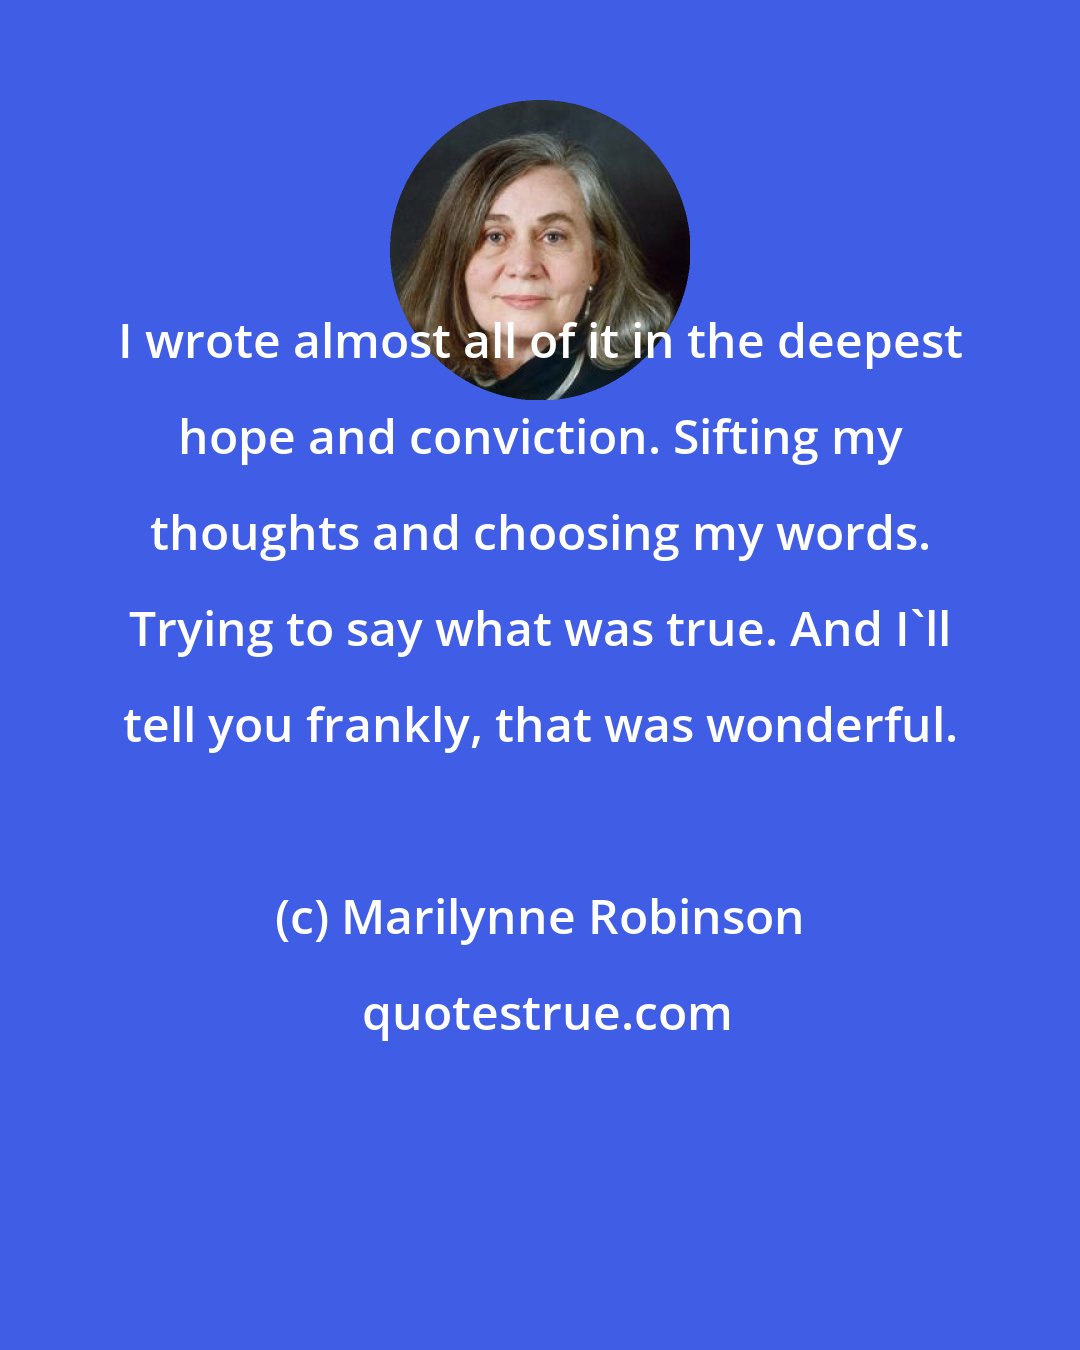 Marilynne Robinson: I wrote almost all of it in the deepest hope and conviction. Sifting my thoughts and choosing my words. Trying to say what was true. And I'll tell you frankly, that was wonderful.